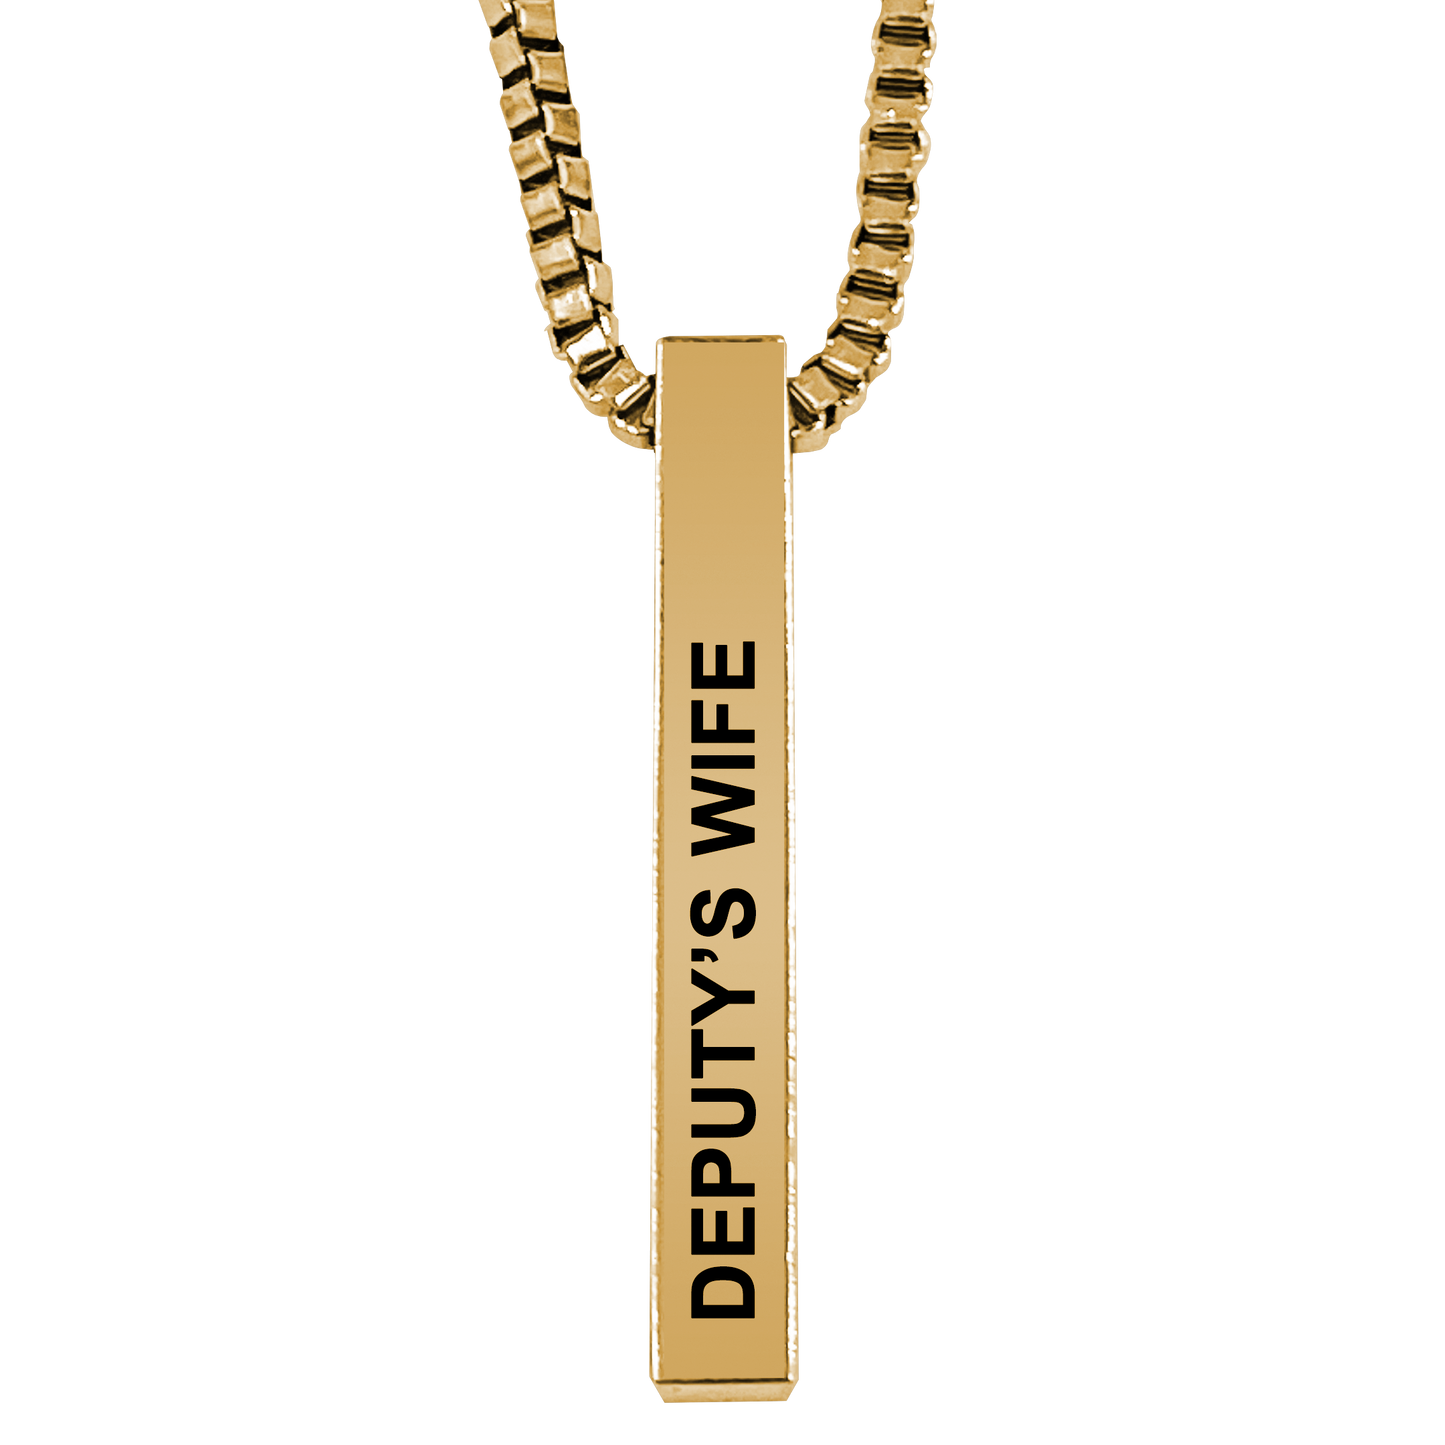 Deputy's Wife Gold Plated Pillar Bar Pendant Necklace Gift Mother's Day Christmas Holiday Anniversary Police Sheriff Officer First Responder Law Enforcement